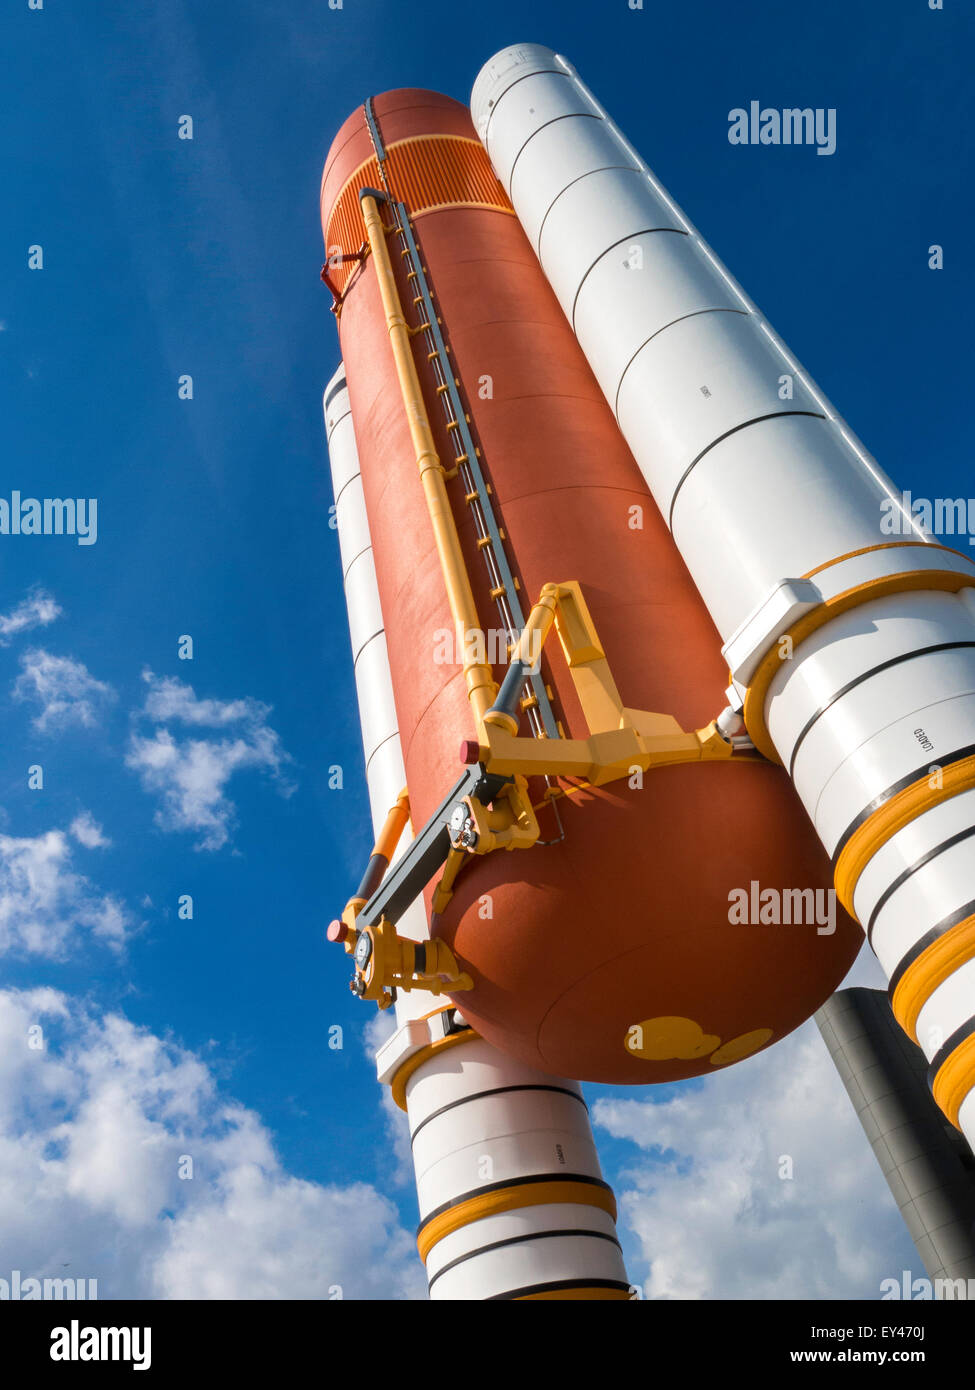 Kennedy Space Center in Cape Canaveral, Florida, USA Stockfoto